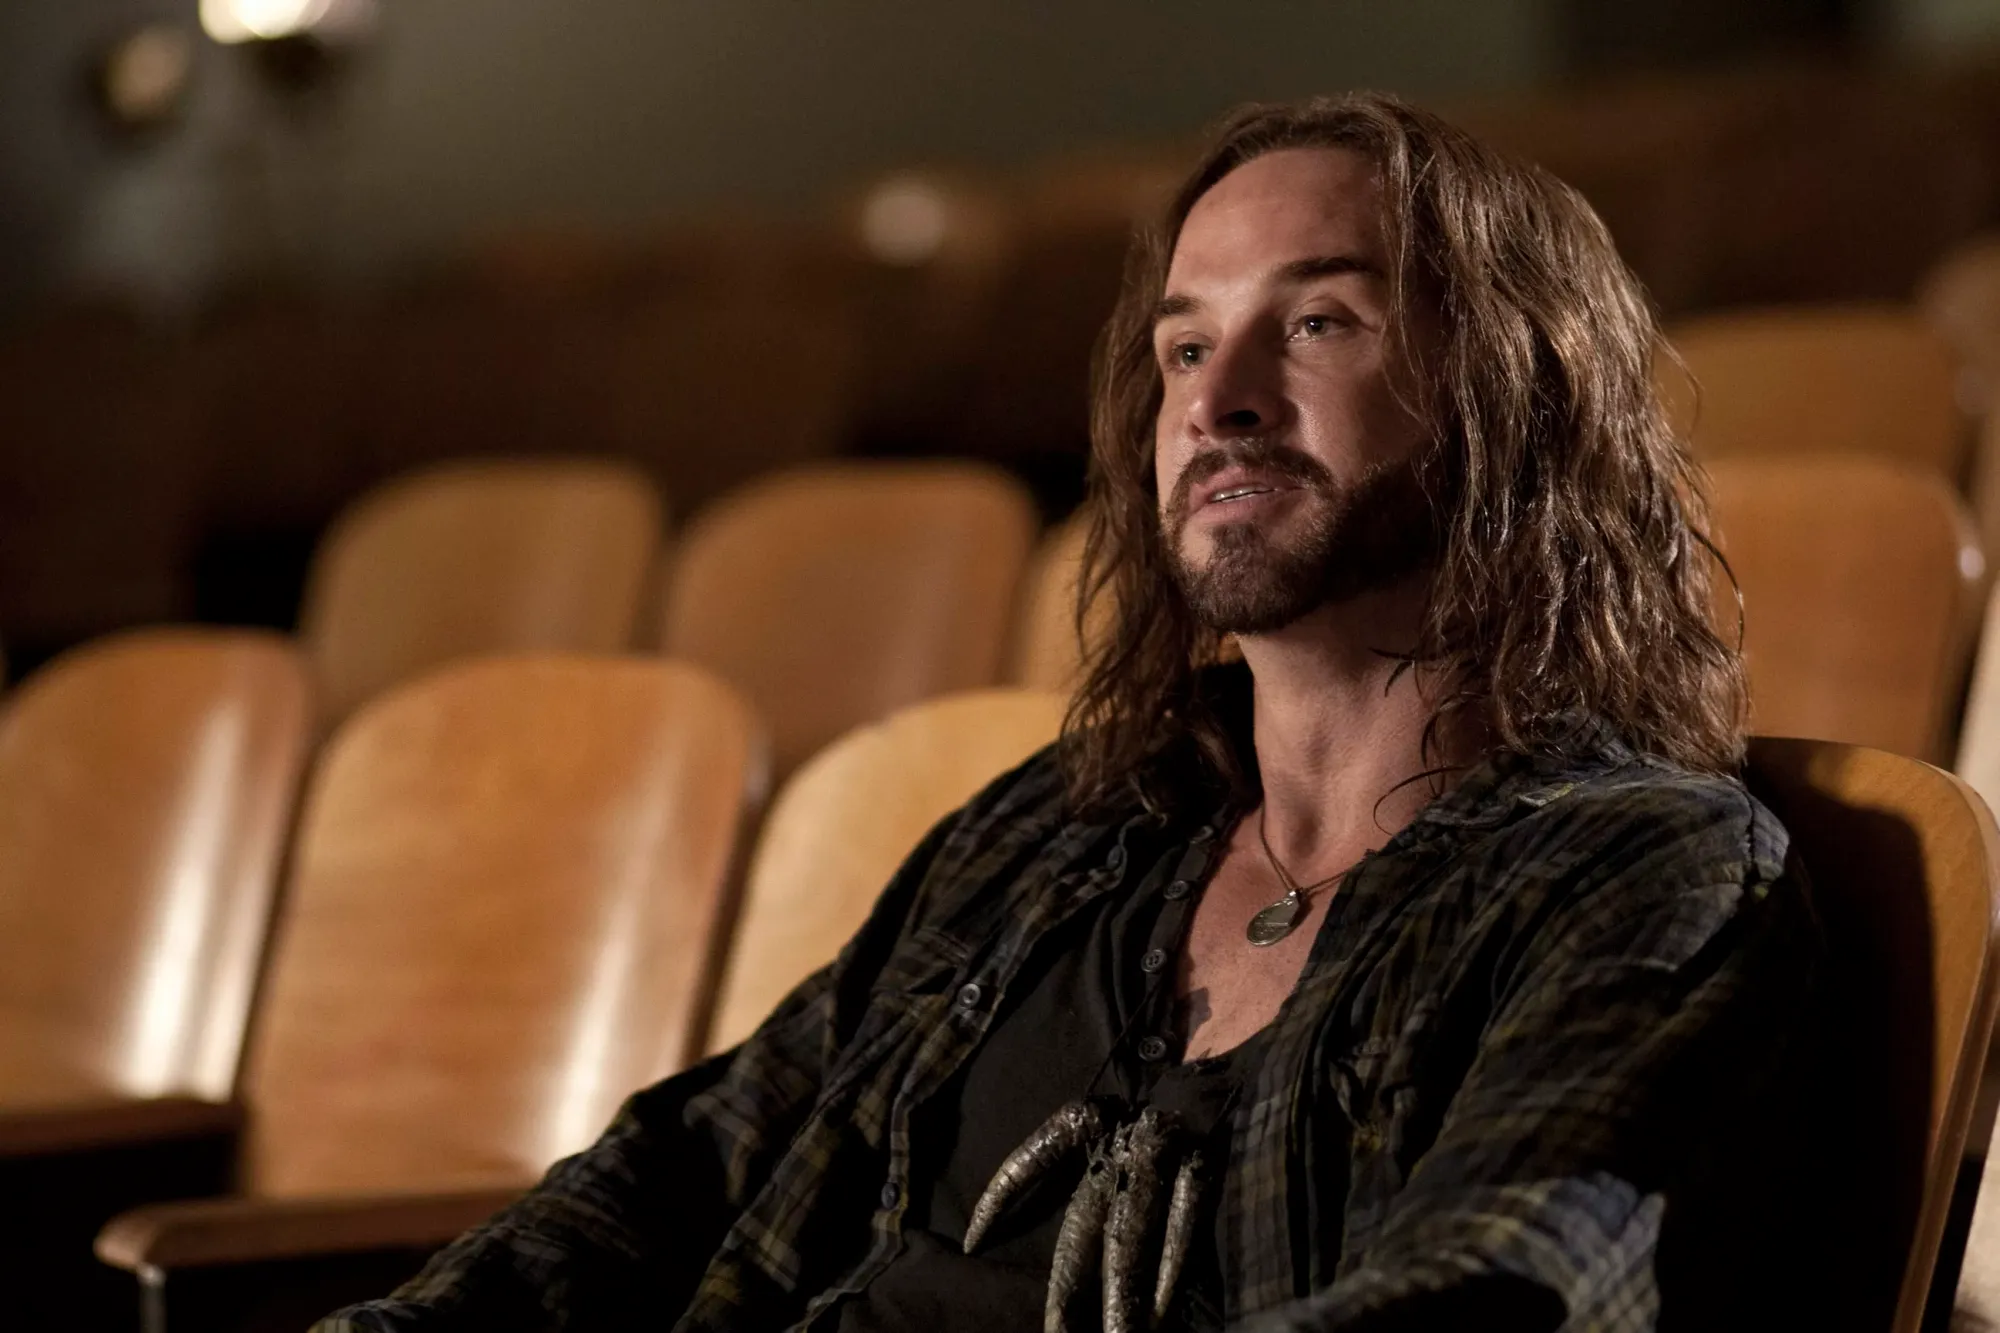 John Pope (Colin Cunningham) in the Falling Skies episode ‘The Armory’. Pope, who has long hair, and wears an open plaid shirt with a medallion and a necklace of alien fingers beneath is sitting in theater stalls addressing someone off-camera.